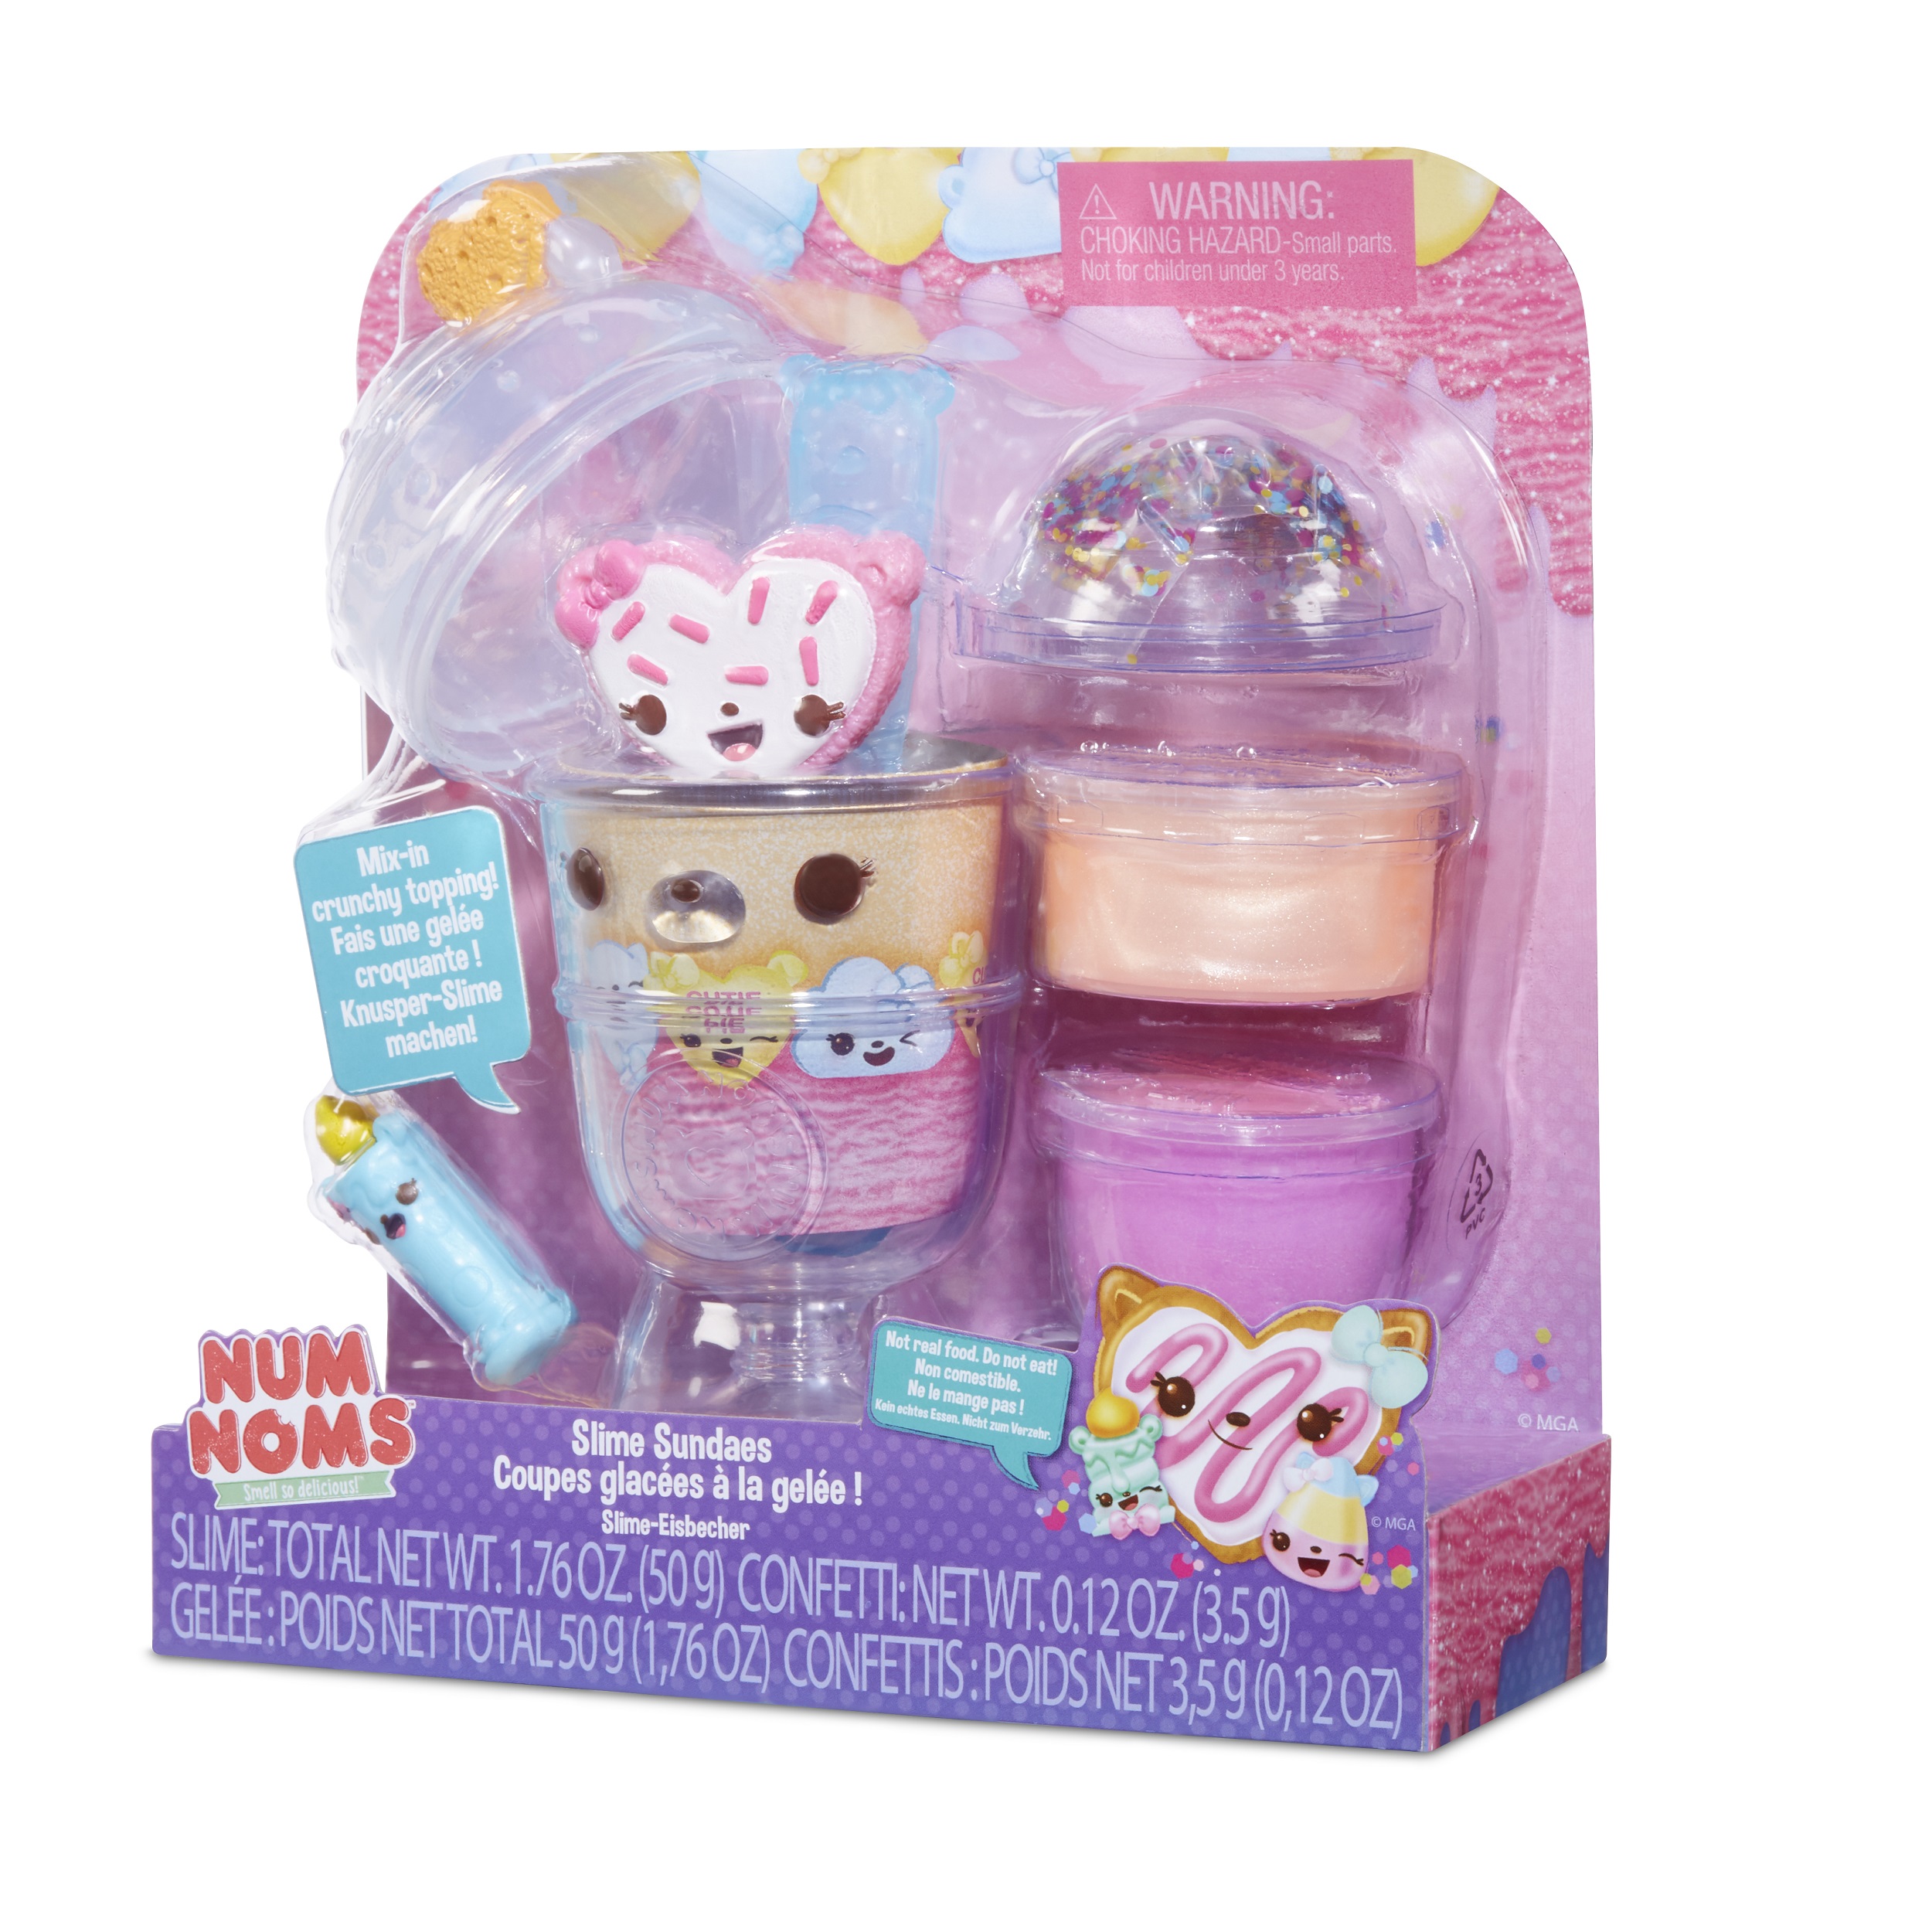 Num Noms Prince Charming Toy Slime